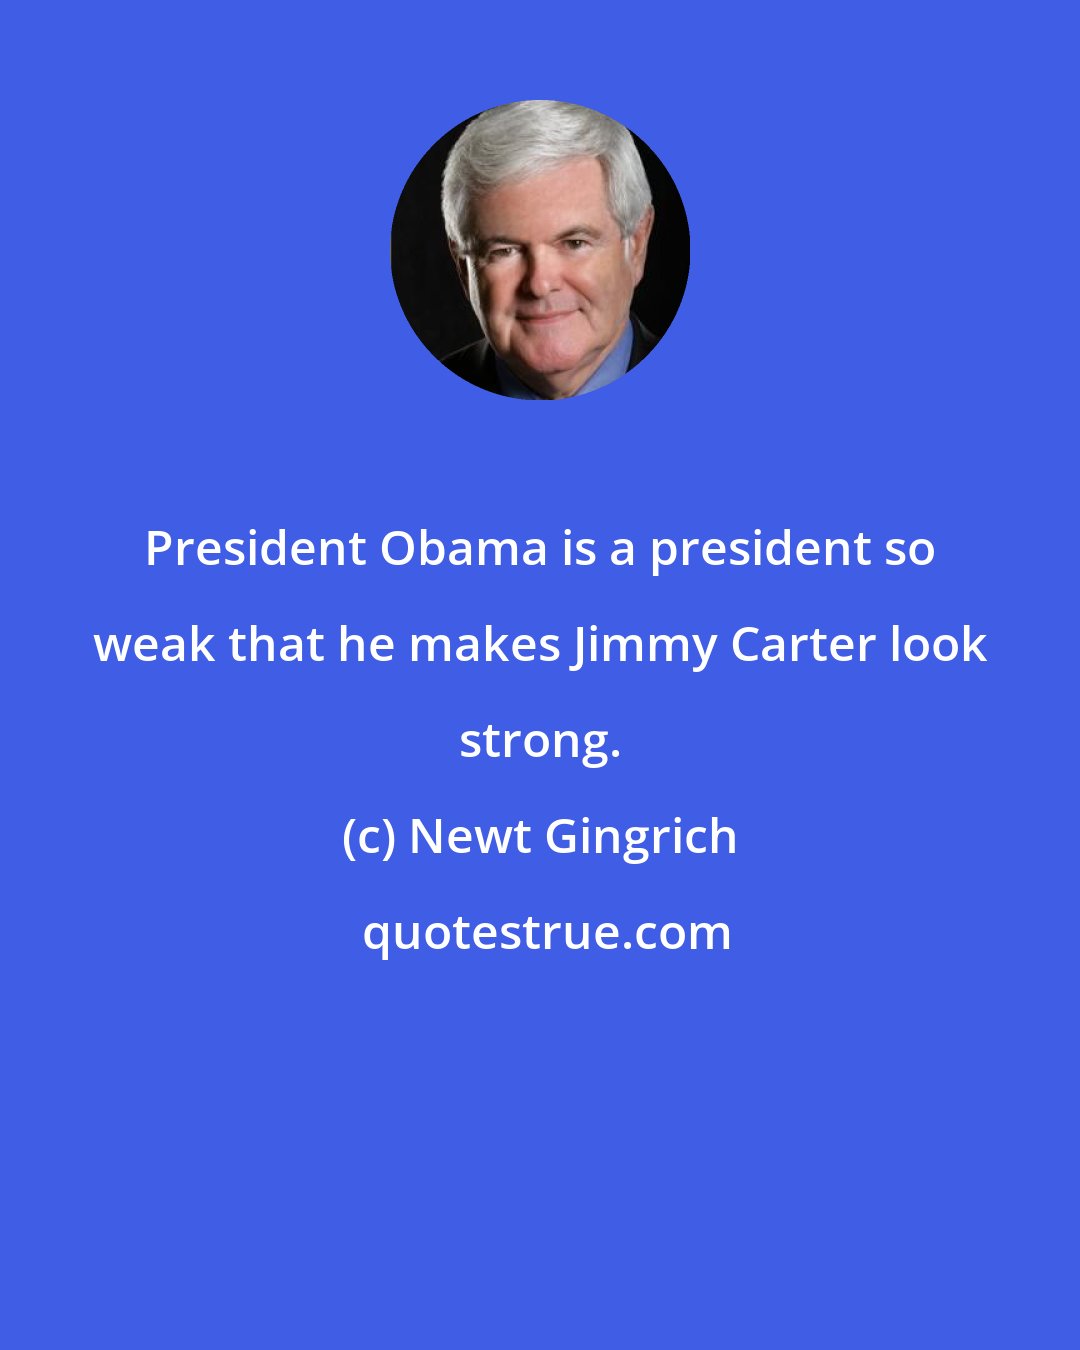 Newt Gingrich: President Obama is a president so weak that he makes Jimmy Carter look strong.